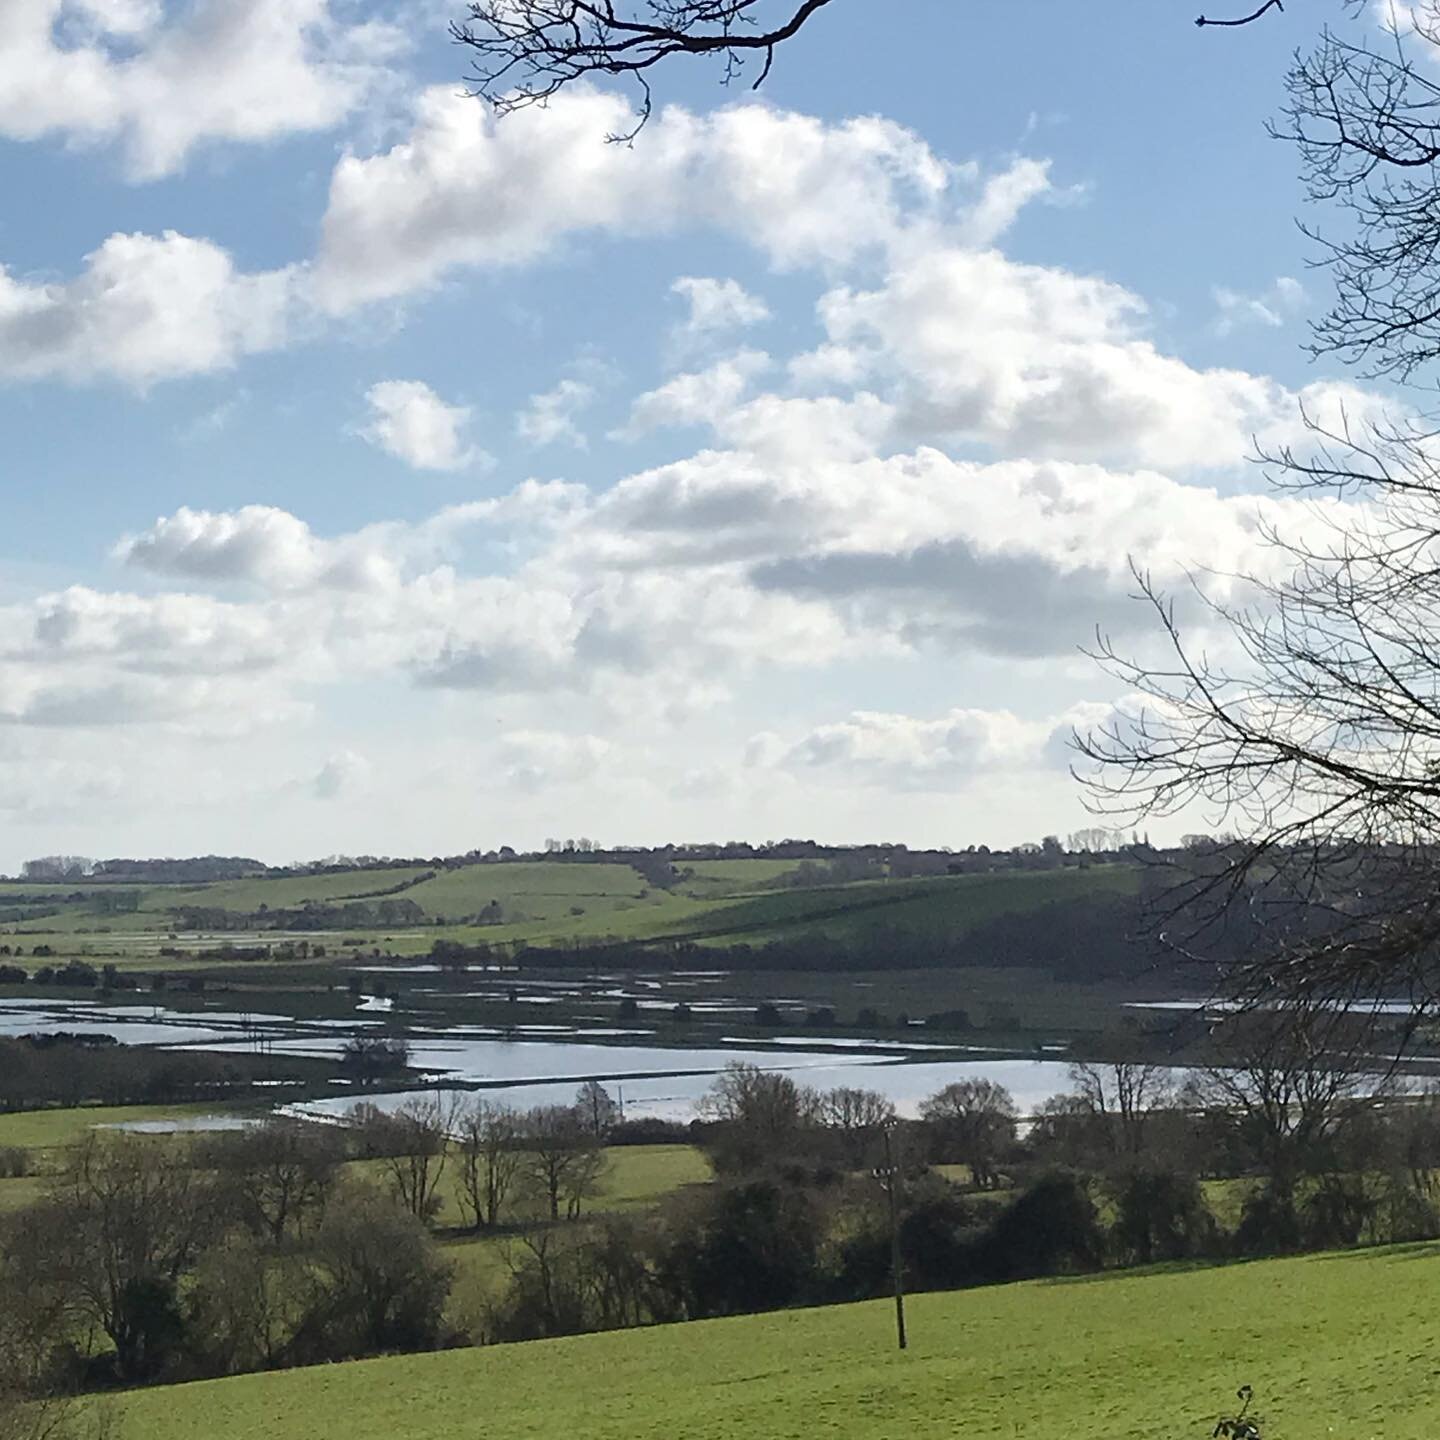 Flooding in the Brede valley, view from #barefootyurts #flood #yurts #glampinglife #glampingnotcamping #coolstays #weekendvibes #availabilitythisweekend